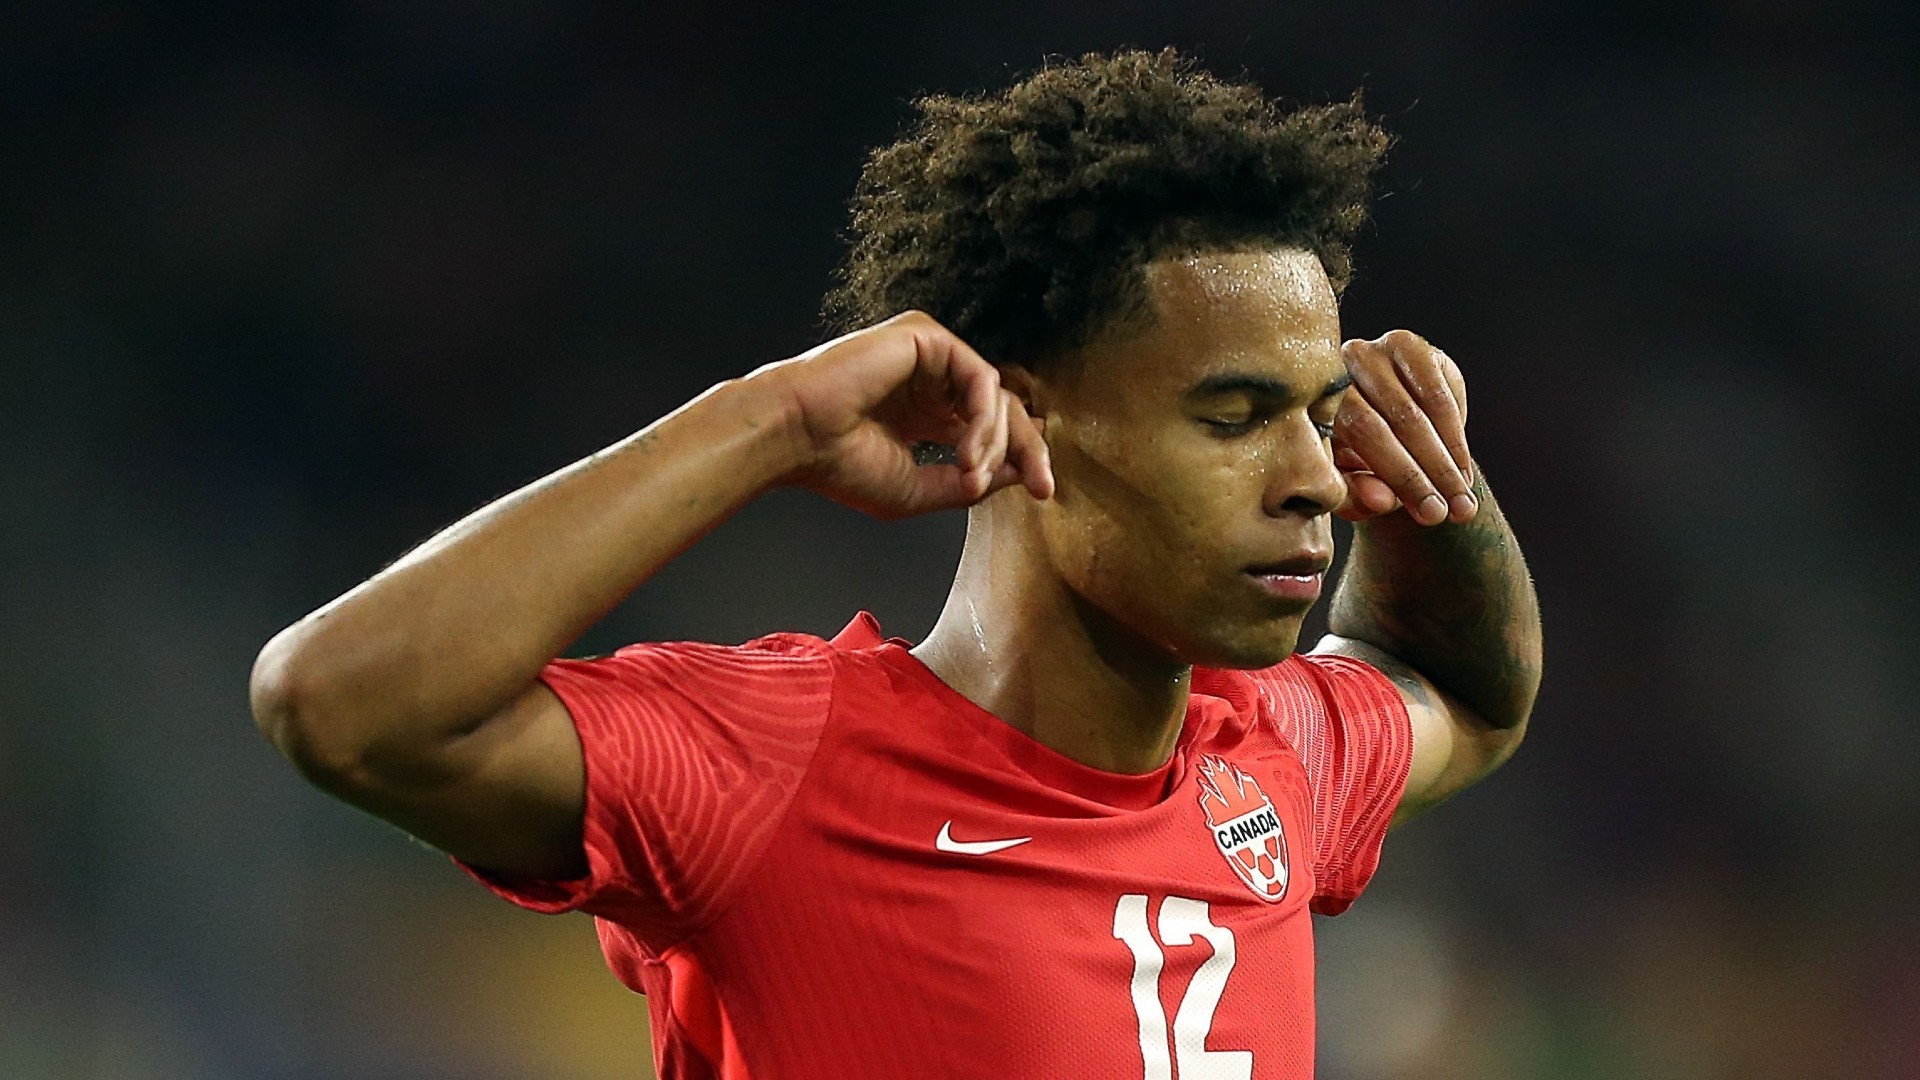 Canada star Buchanan subjected to racist abuse after scoring in Gold Cup clash with Mexico